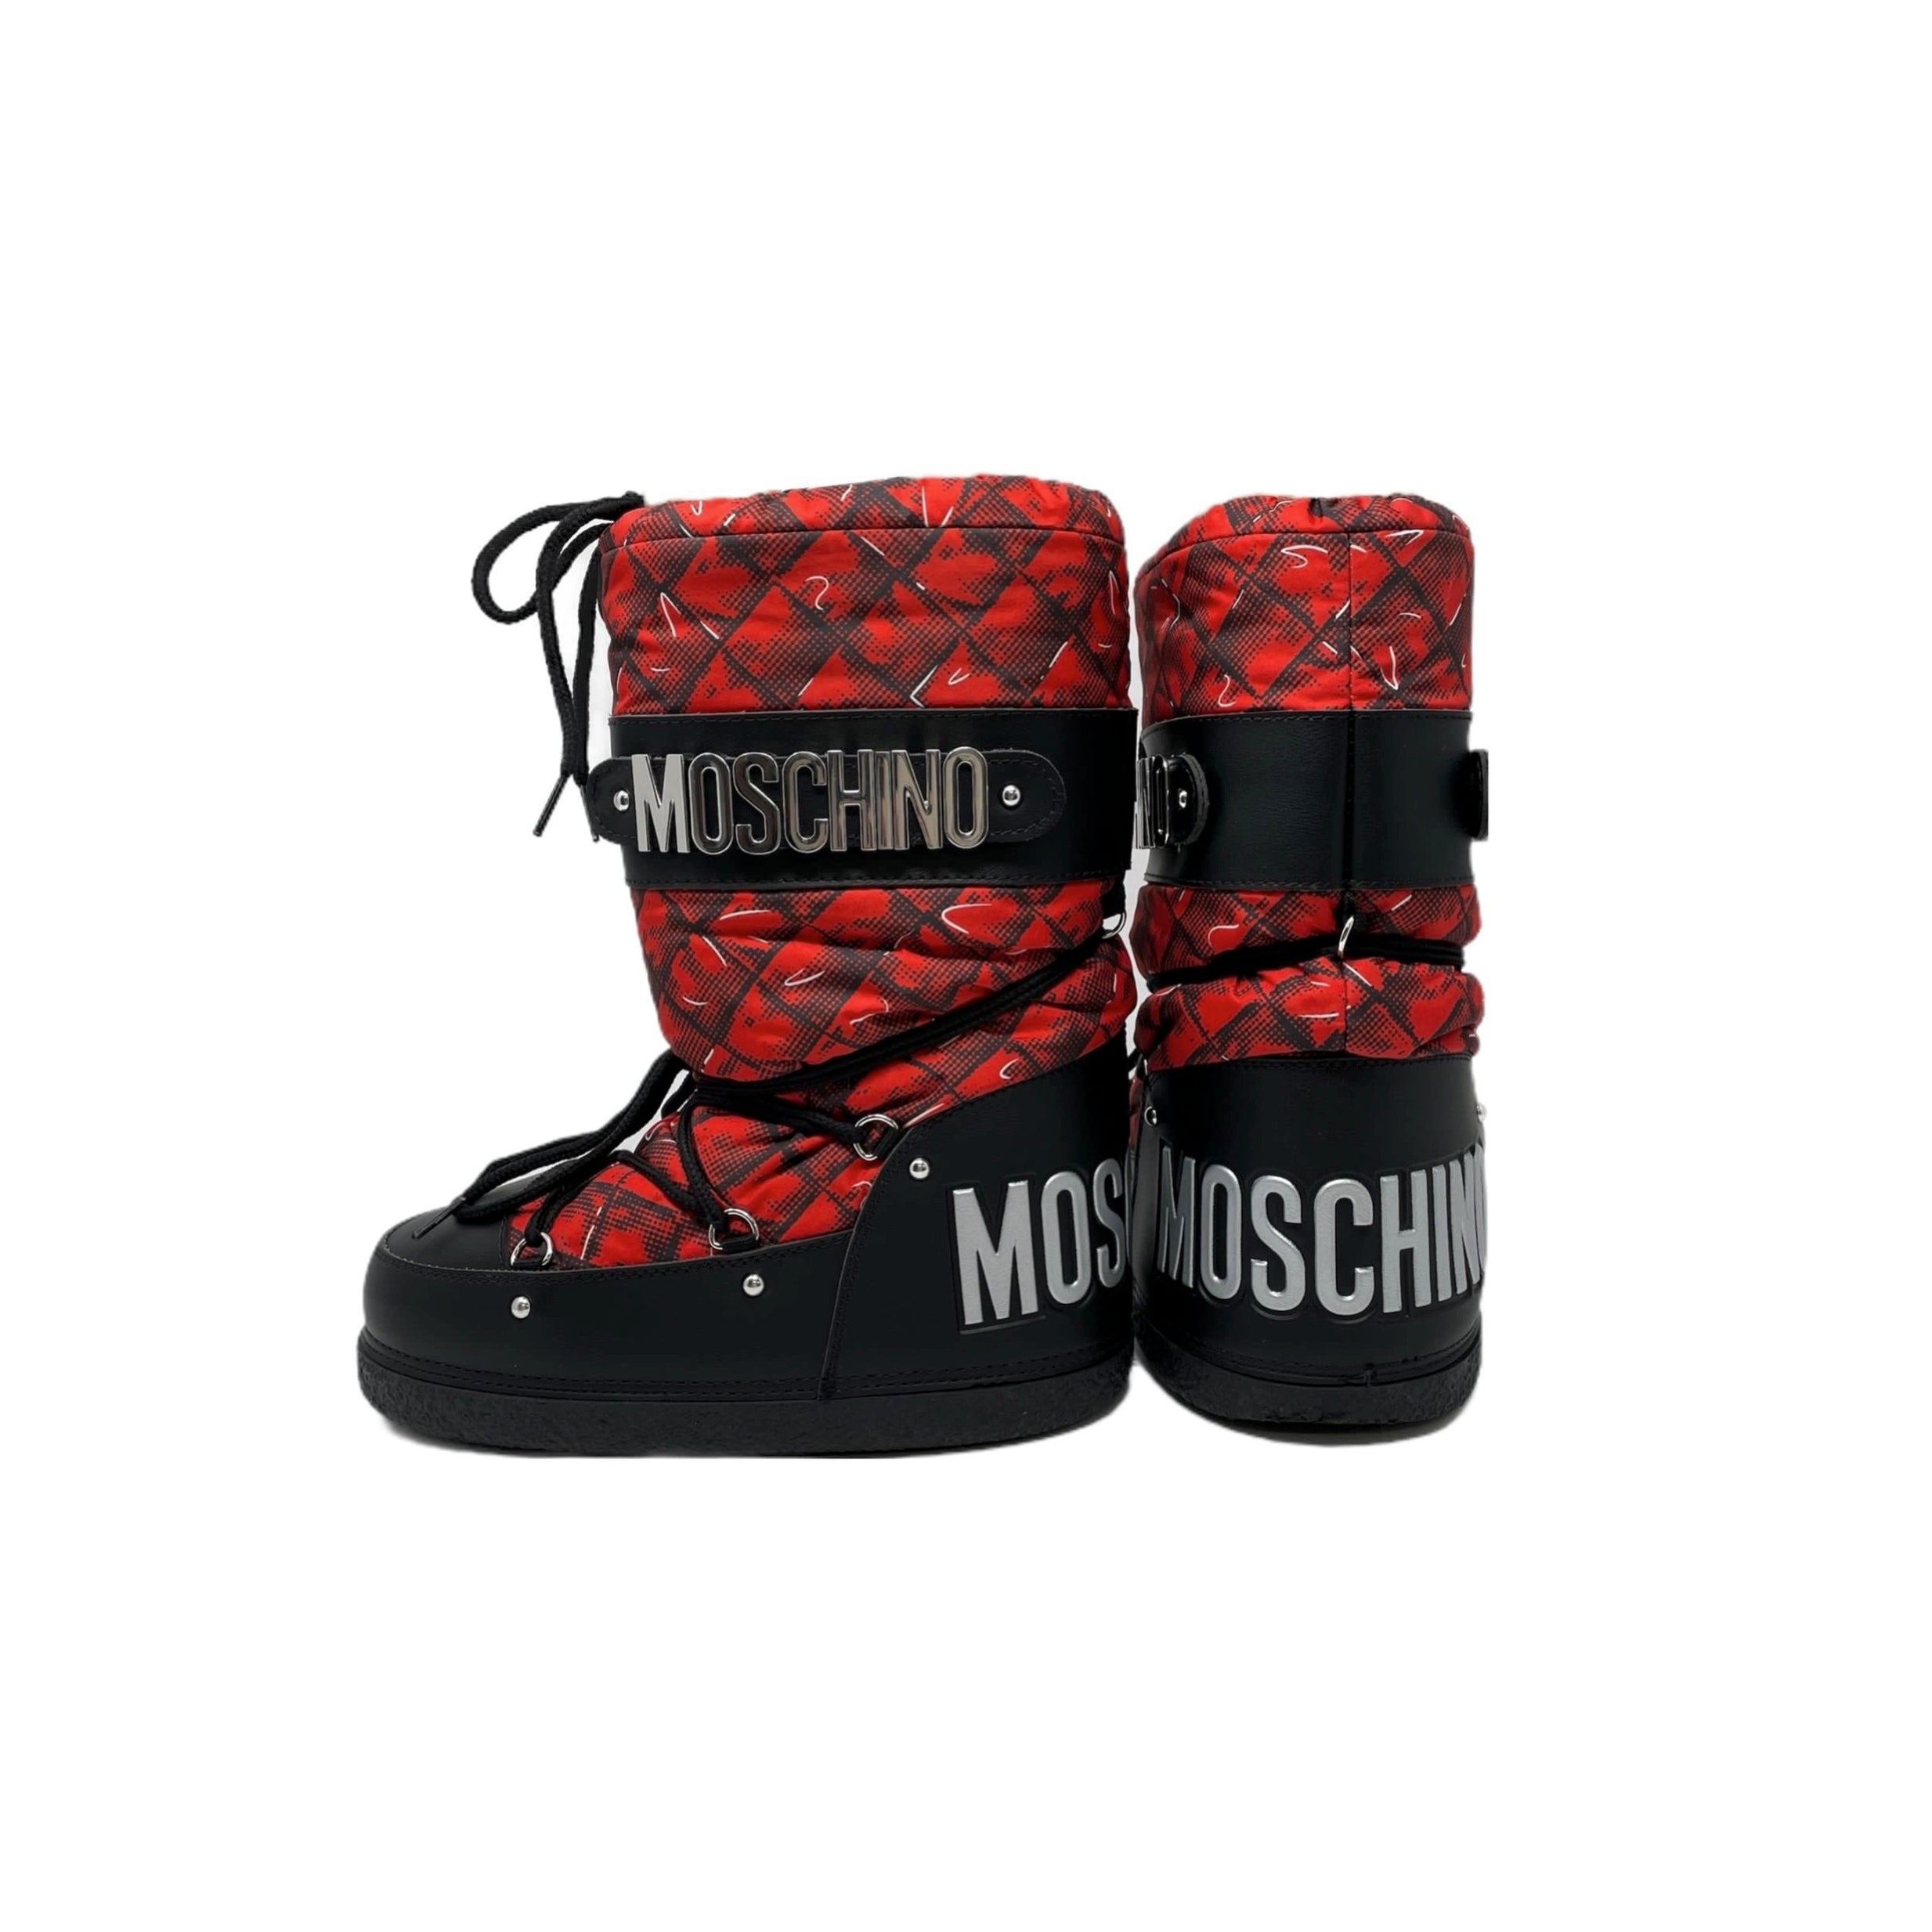 Moschino Red Brick Logo Boots - Shoes